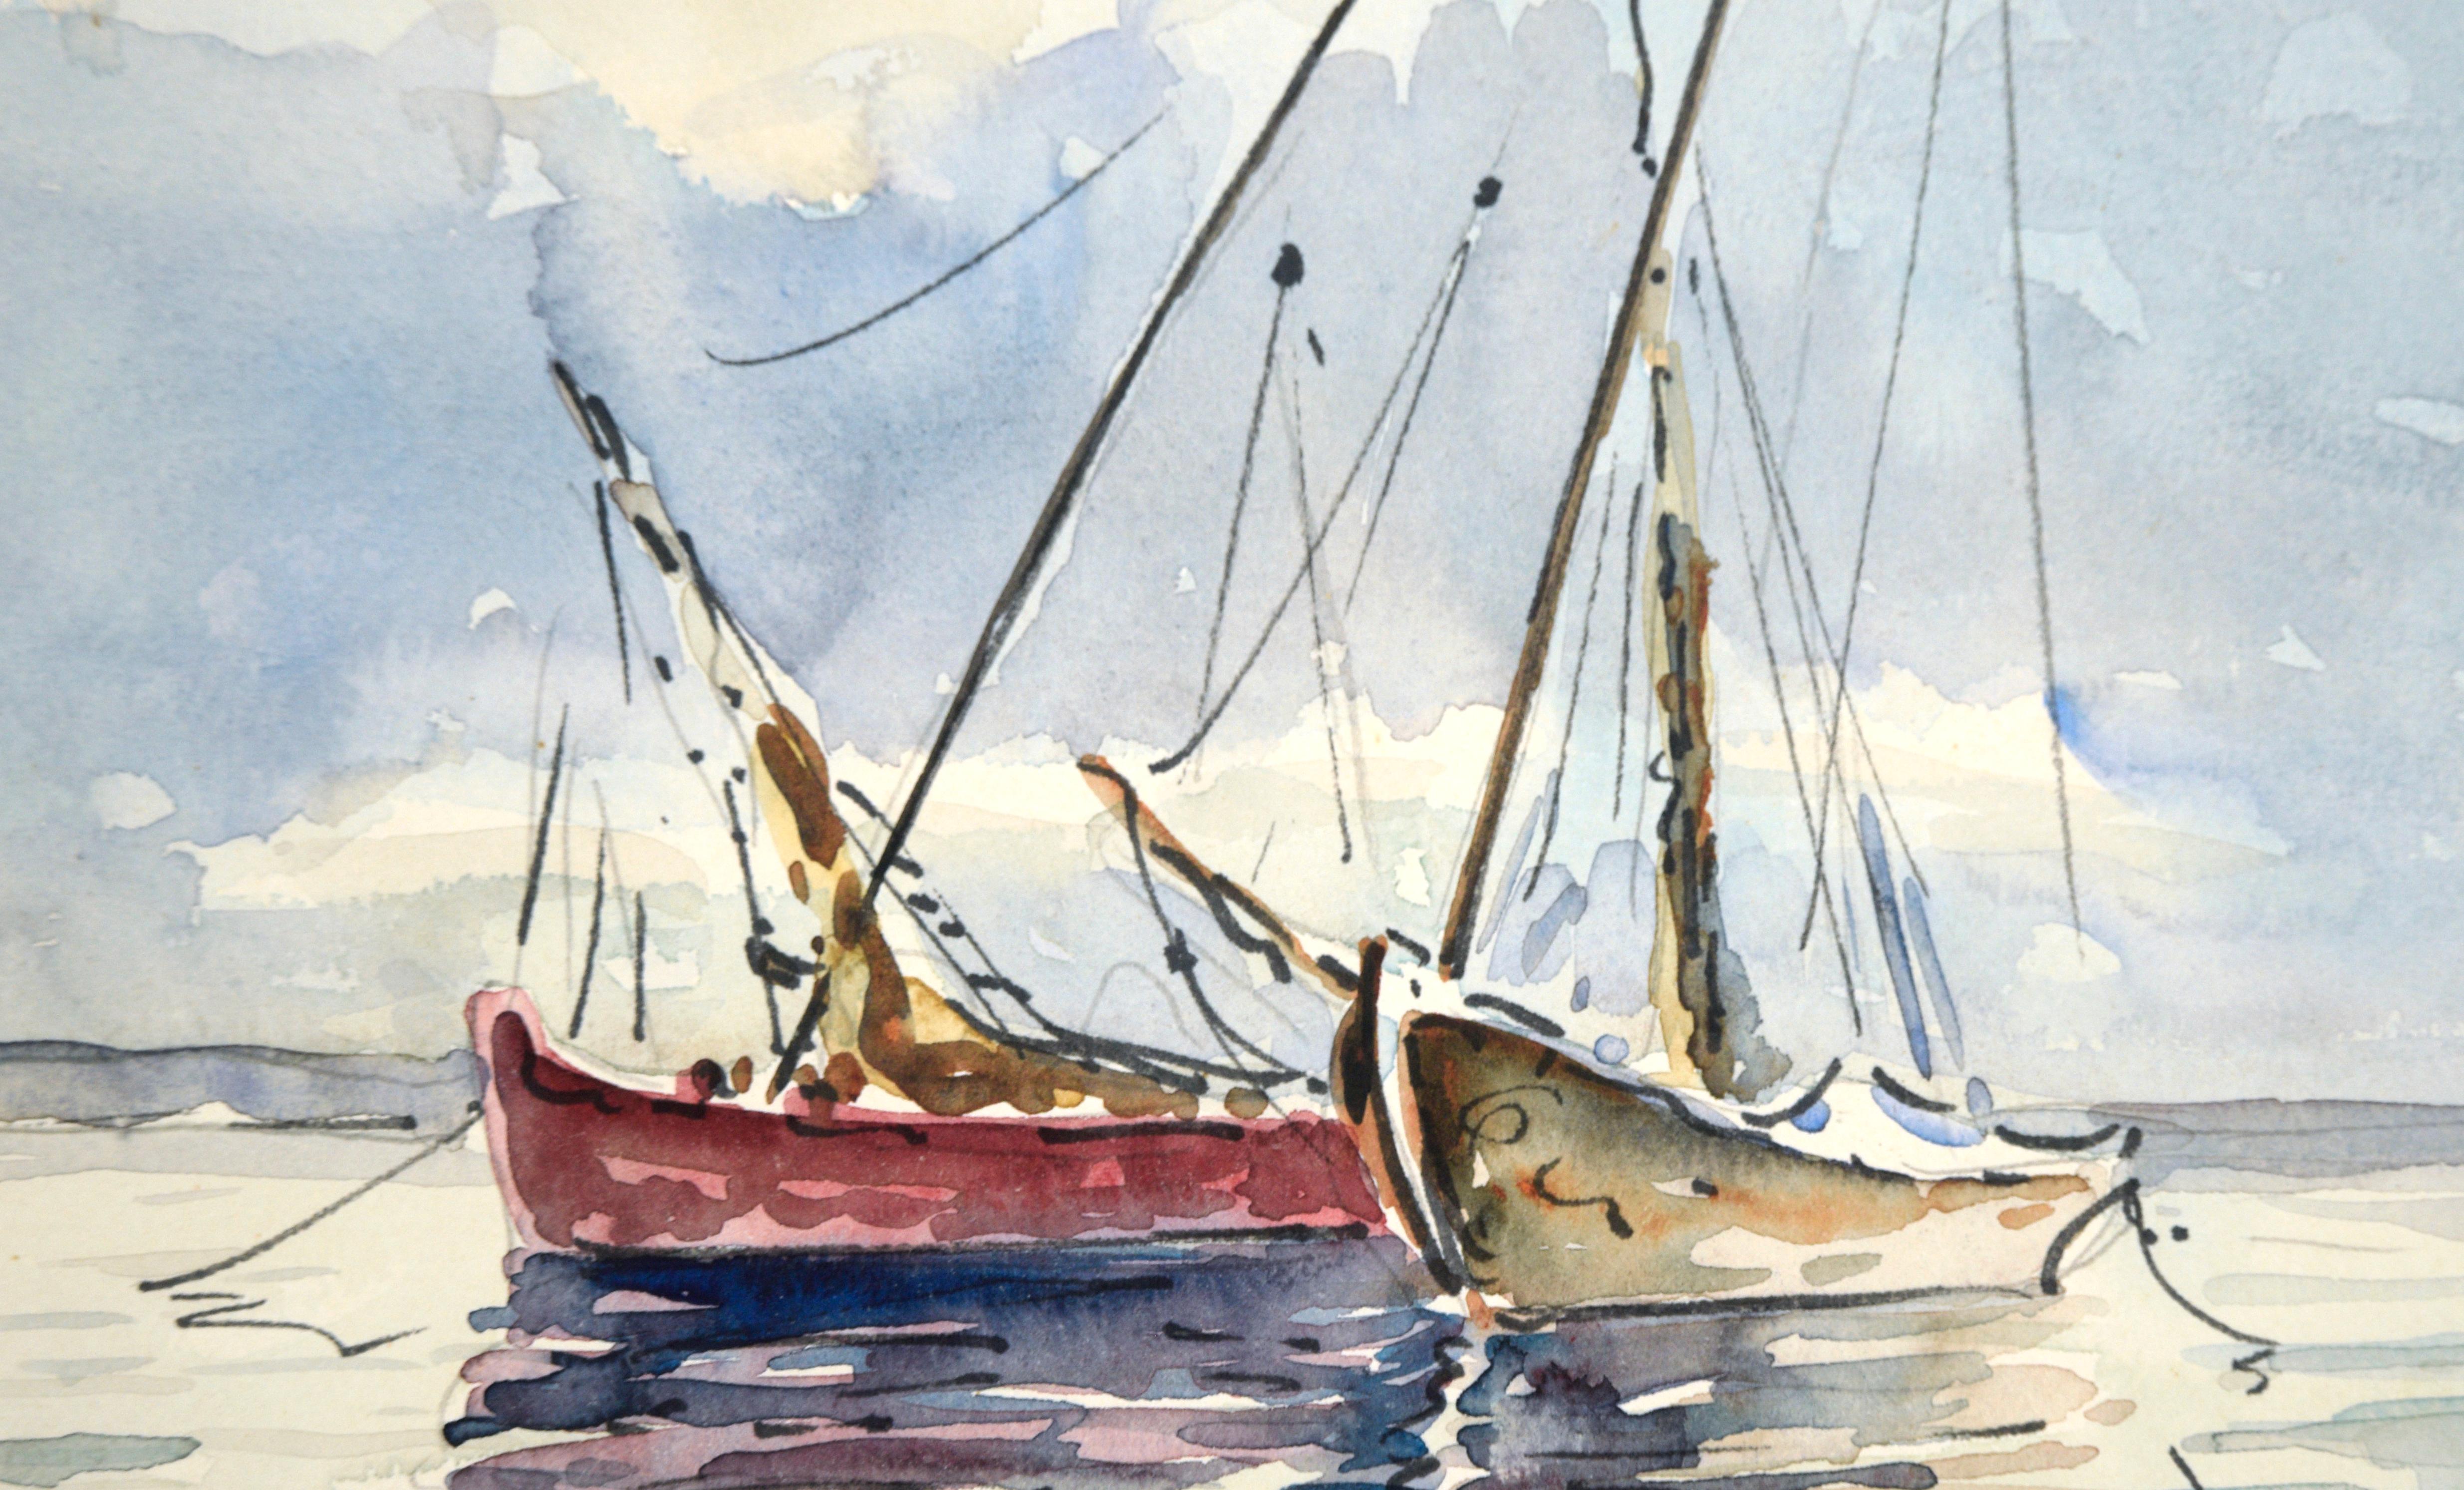 Two Anchored Sailboats - Nautical Seascape in Watercolor on Paper - American Impressionist Art by Unknown